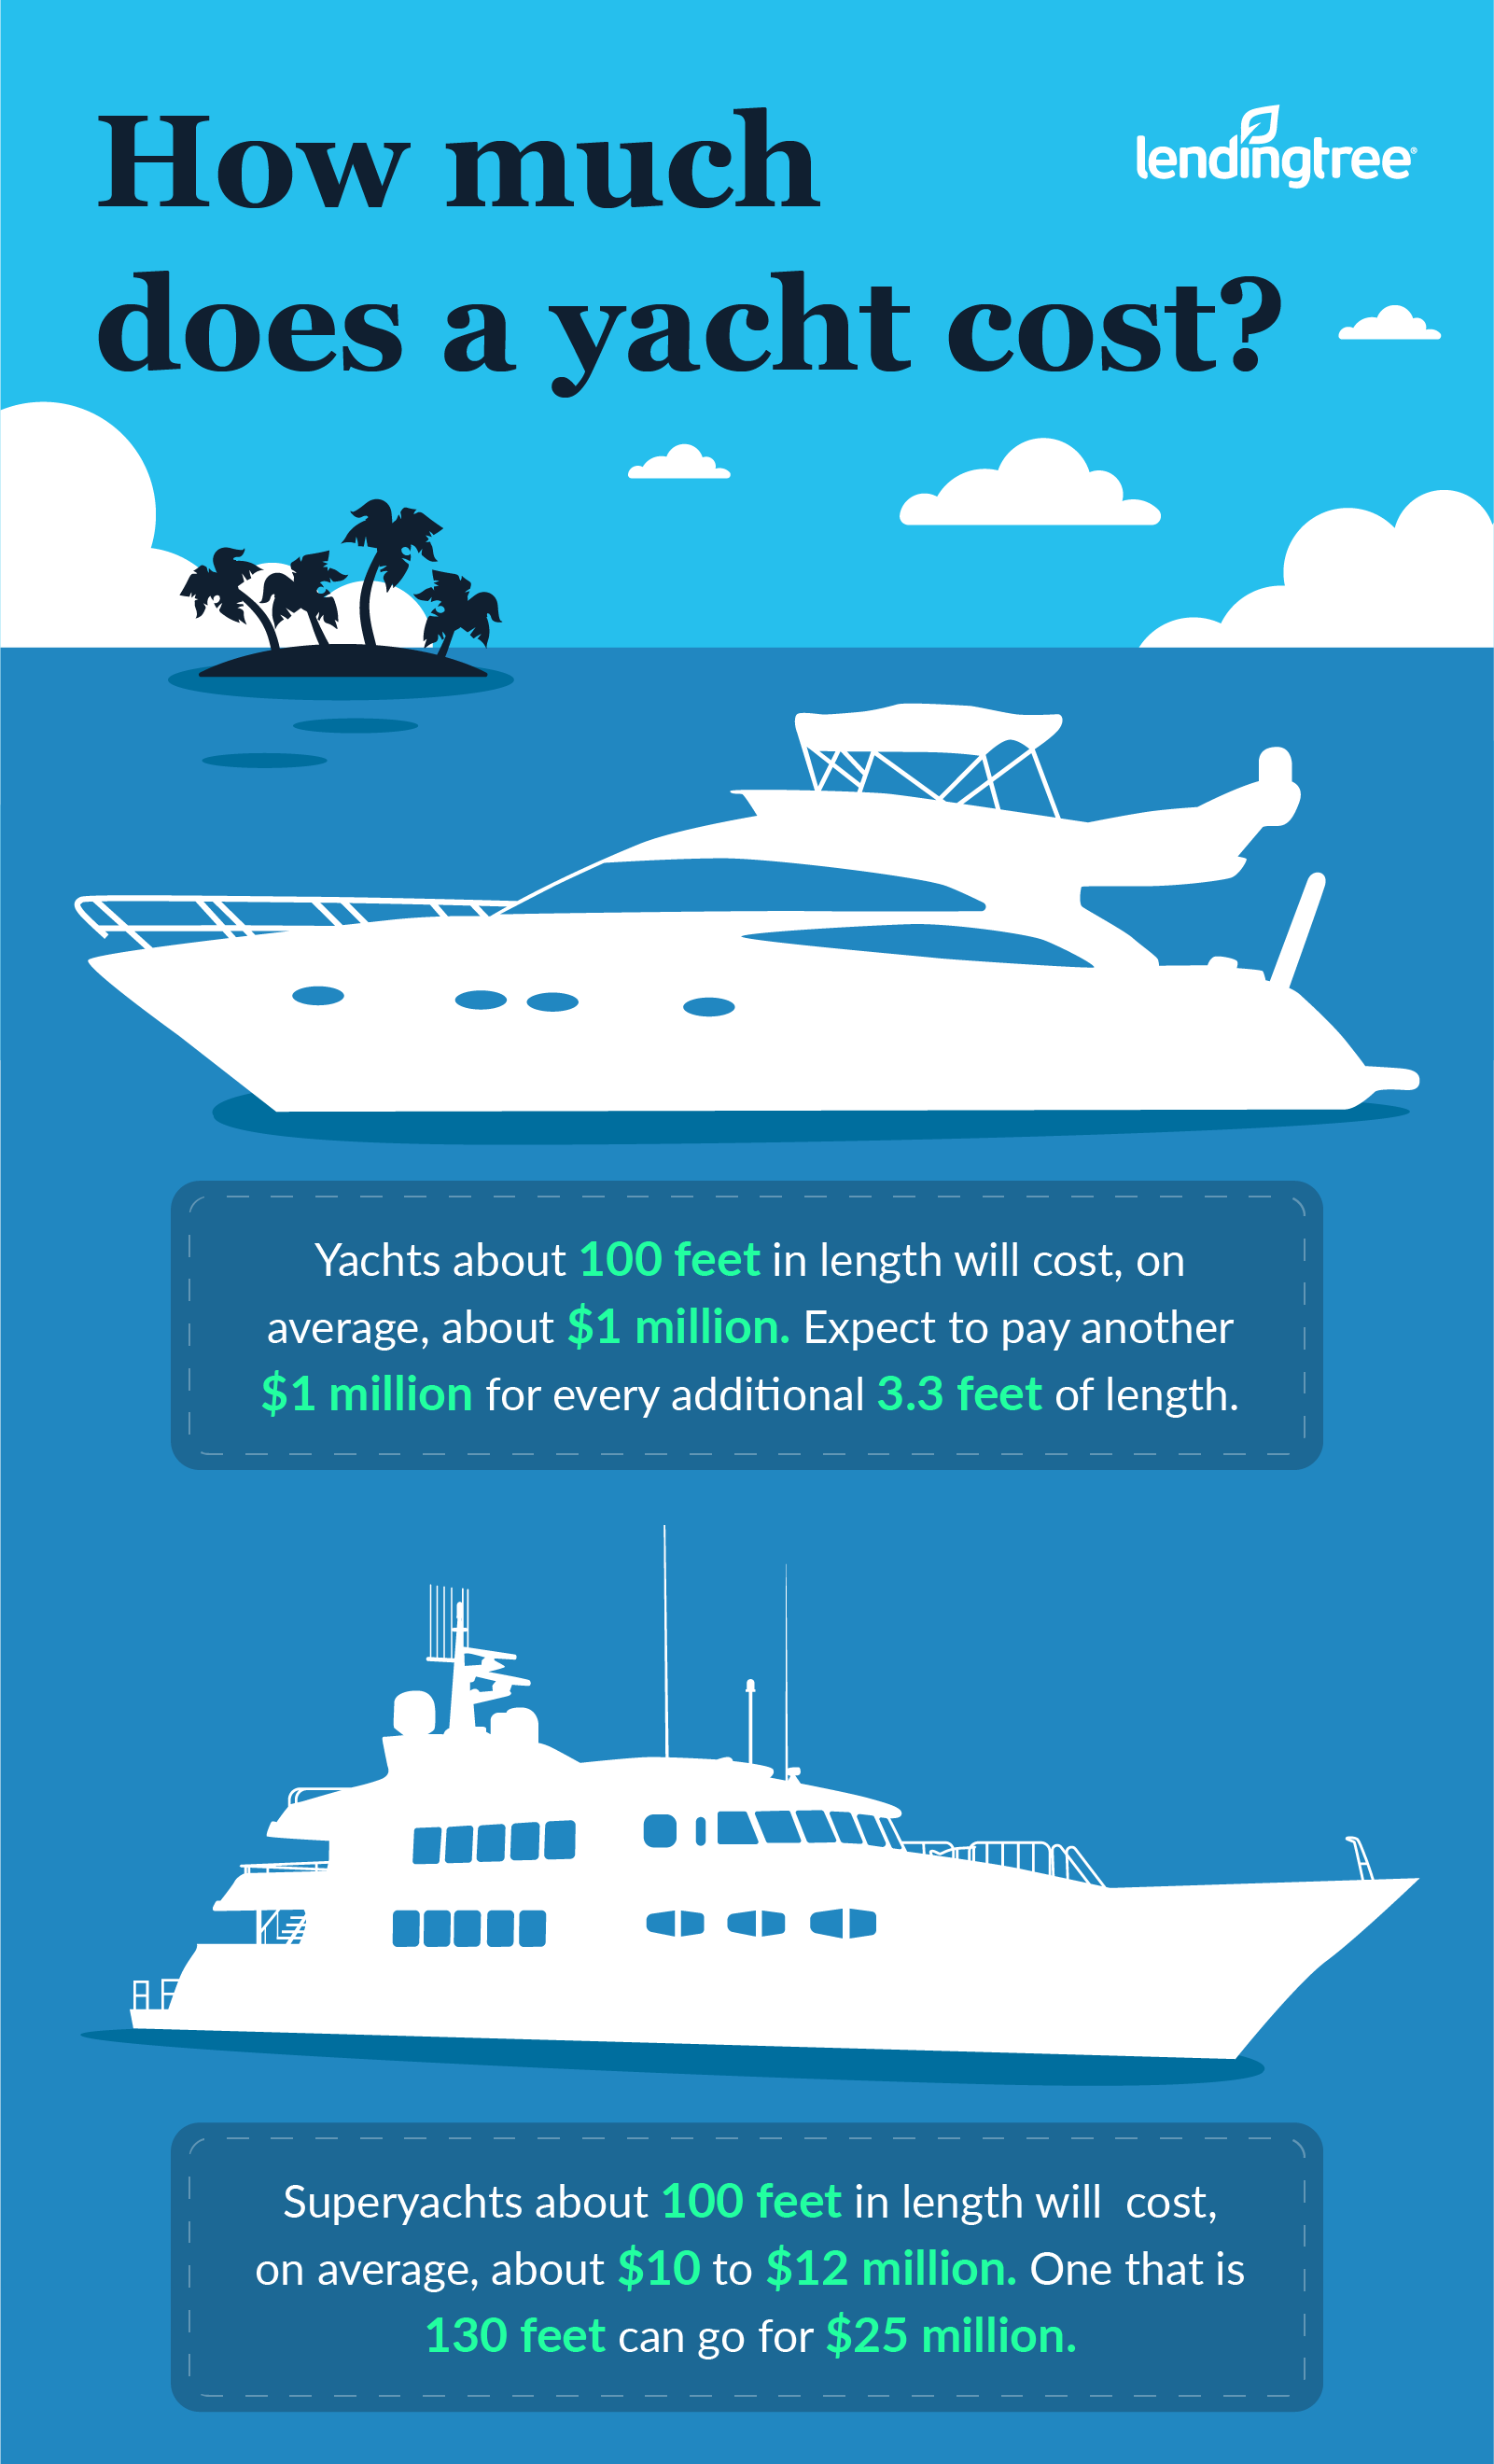 How much does a yacht cost